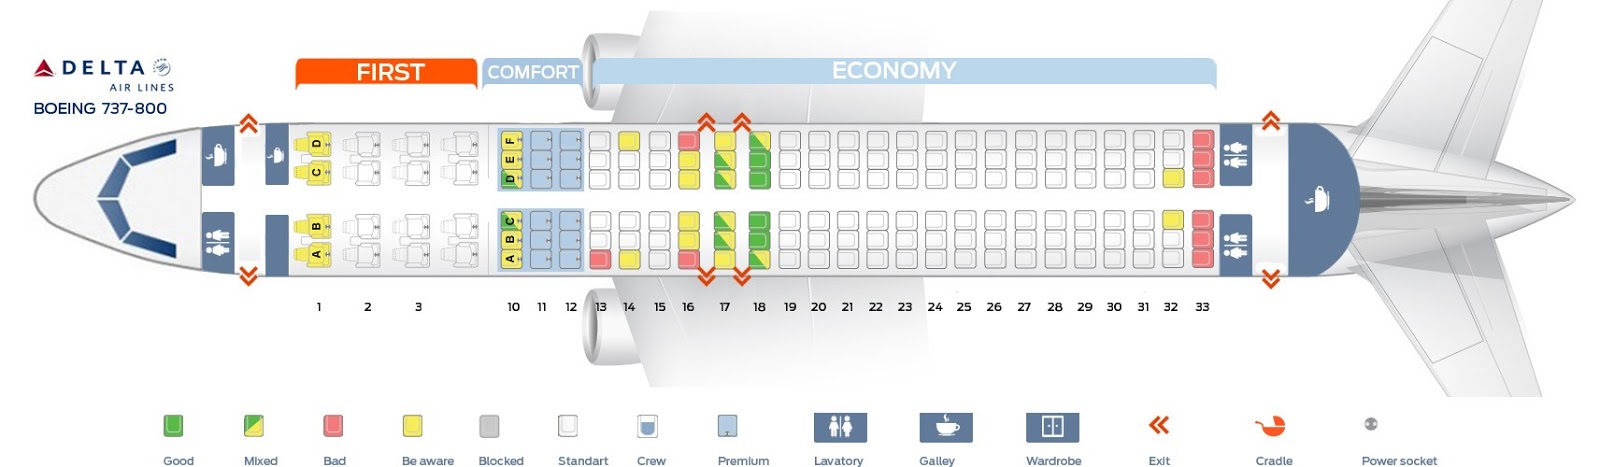 Delta Airlines Seating Chart